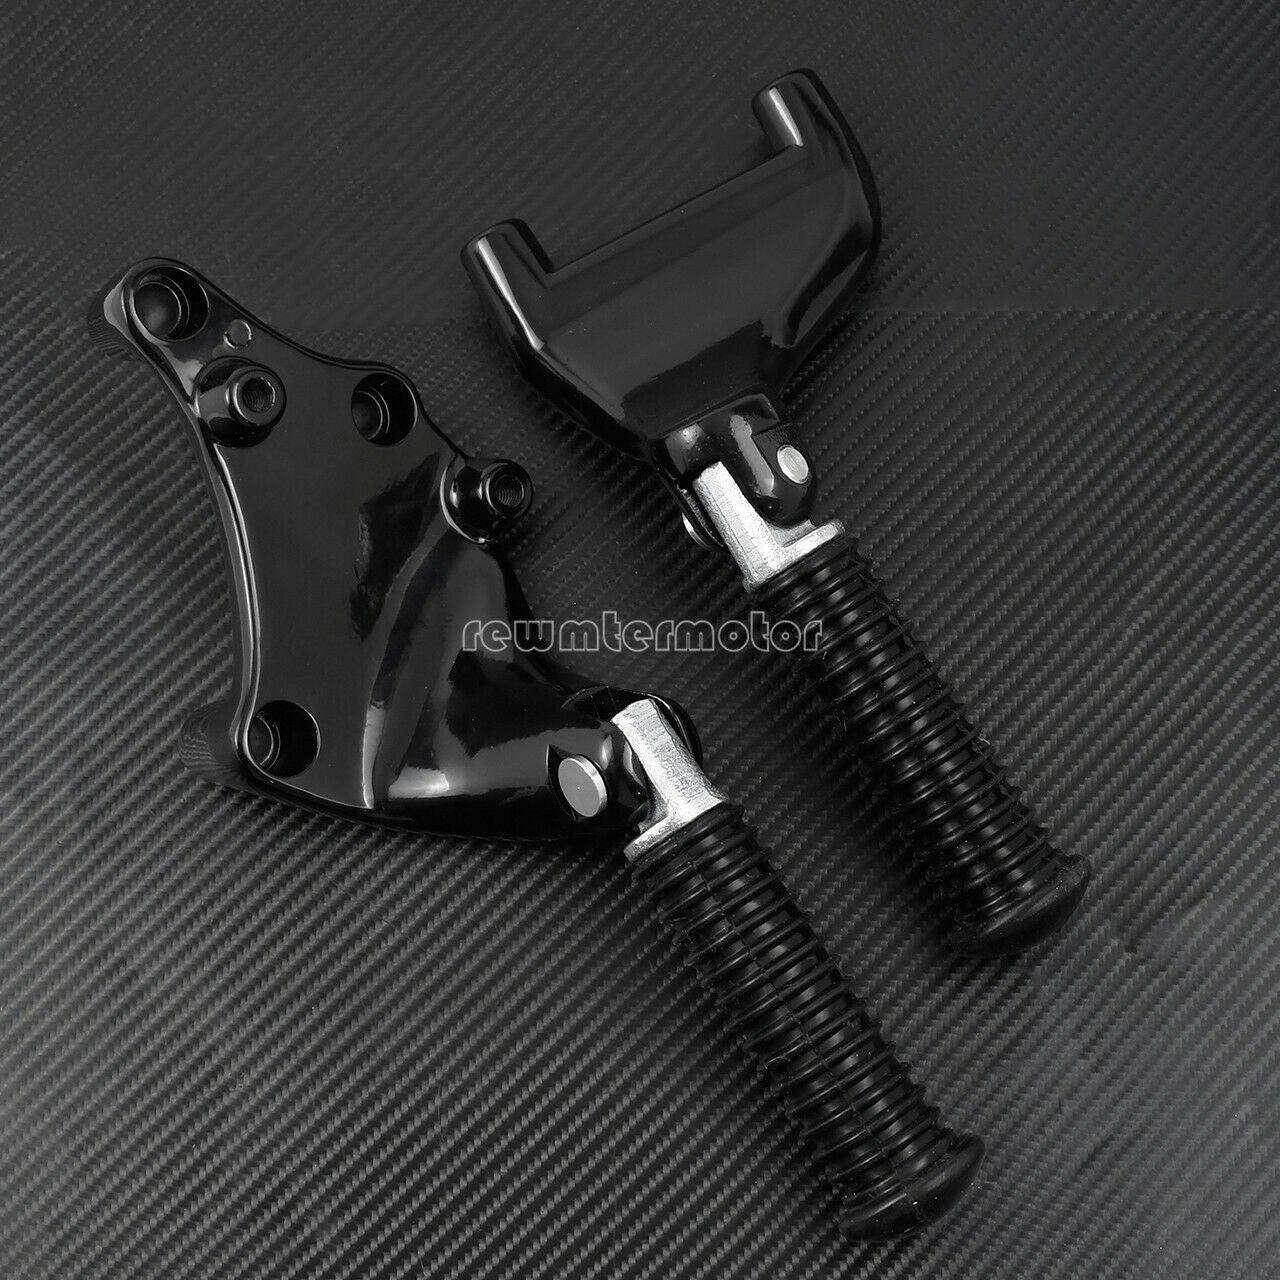 Rear Passenger Foot Pegs Pedal Mount Fit For Sportster XL883 1200 48 2014-2019 - Moto Life Products